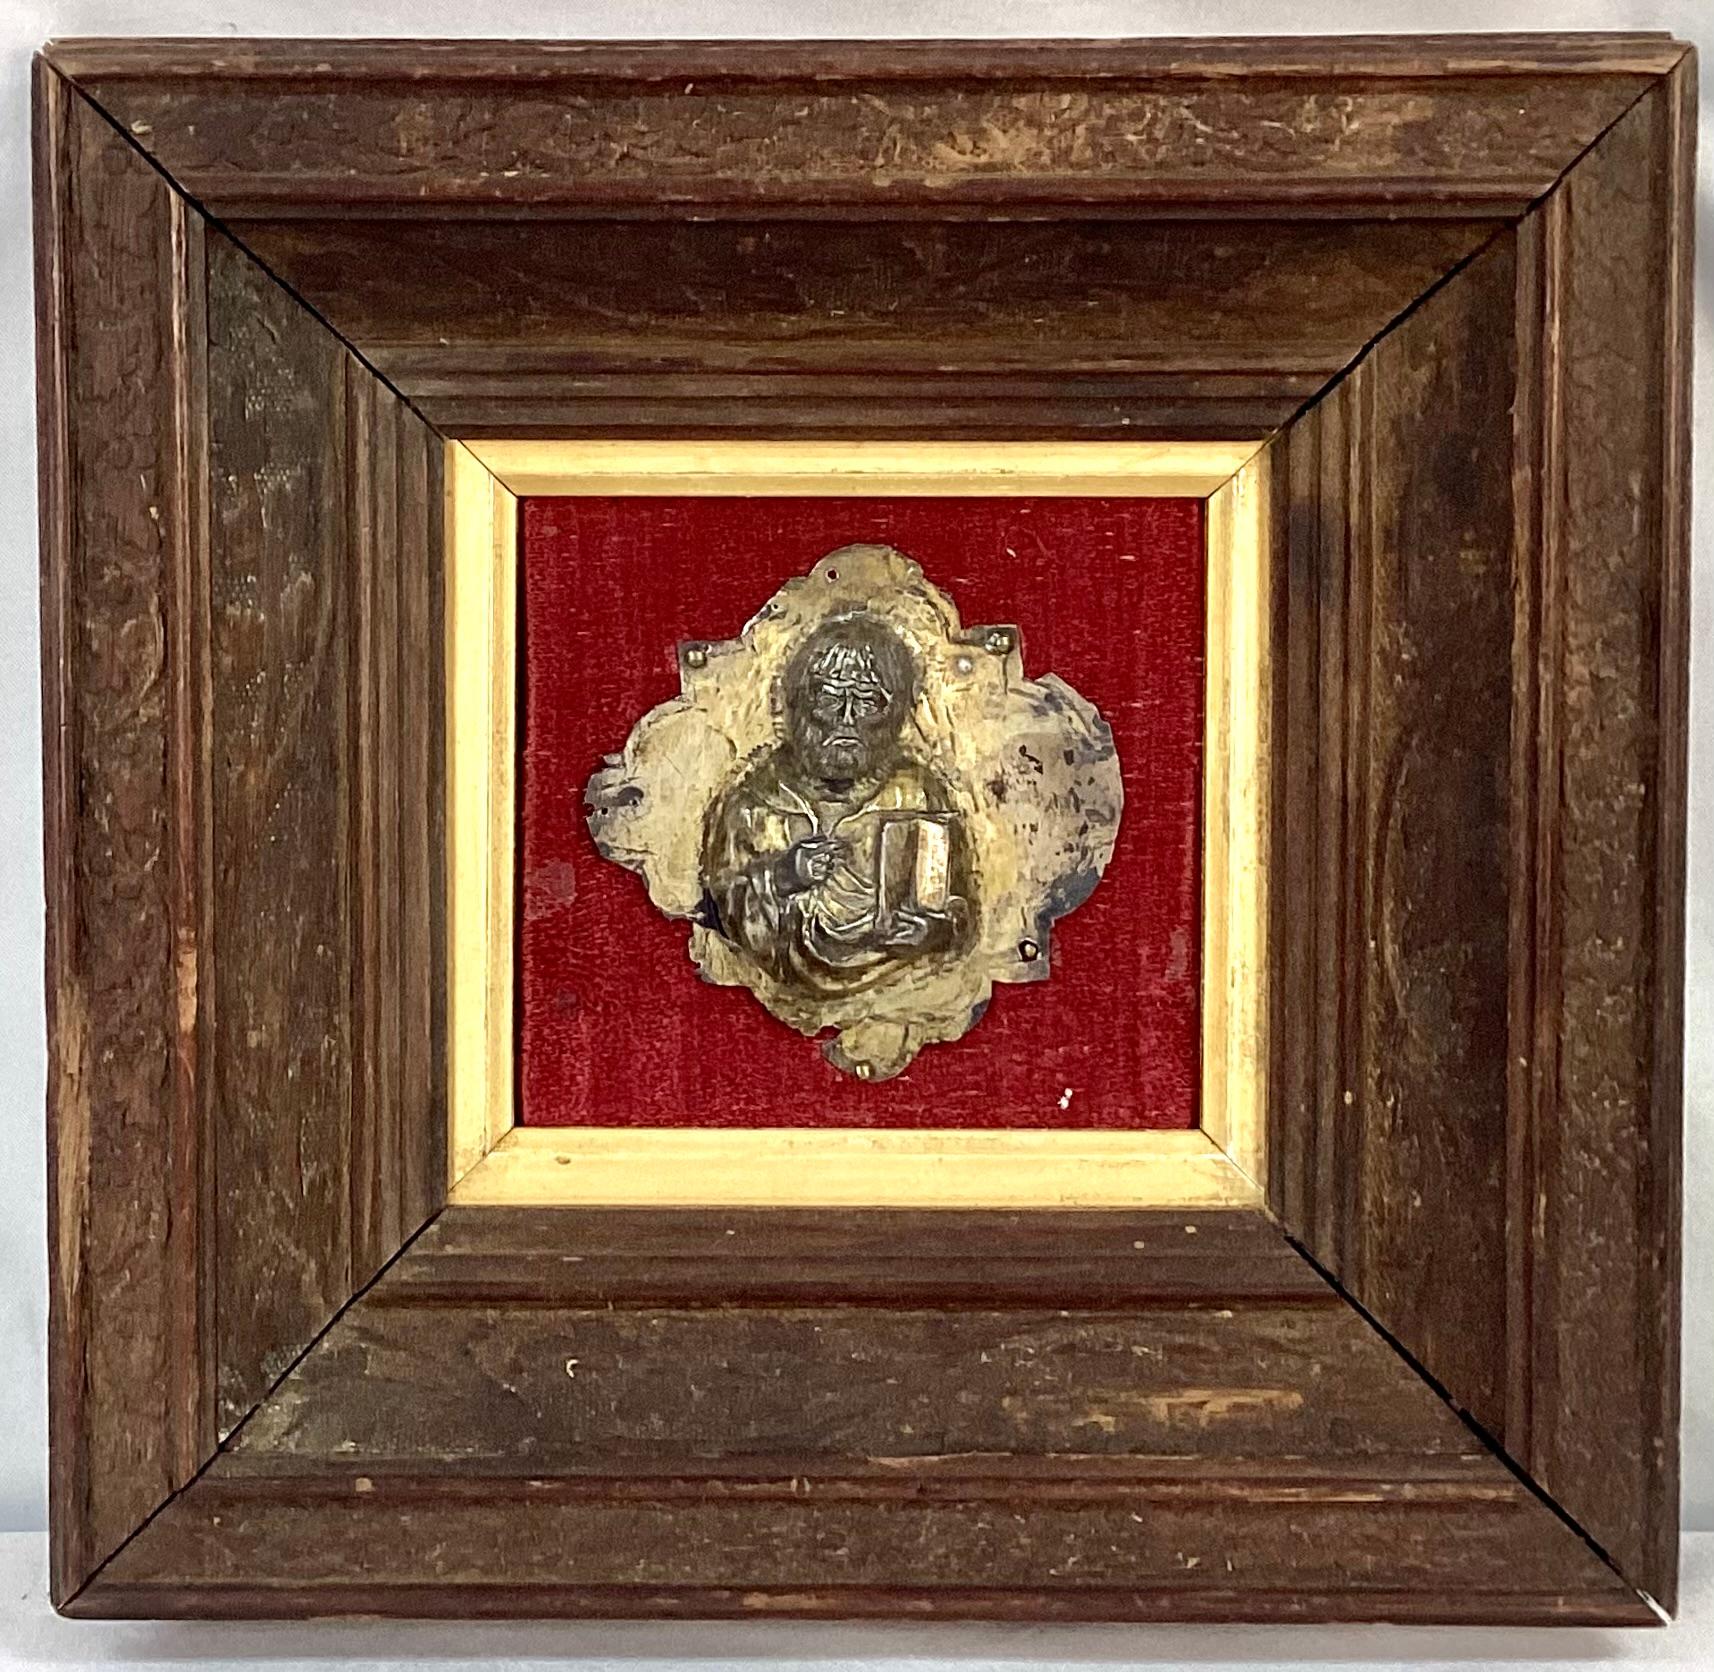 Pair of 17th Century Gilt silver framed saints. Silver saints are draped in period clothing and holding a book, against a red fabric background with gold trim. Square wooden frames have foliage carvings. Most likely originally used as mounts on